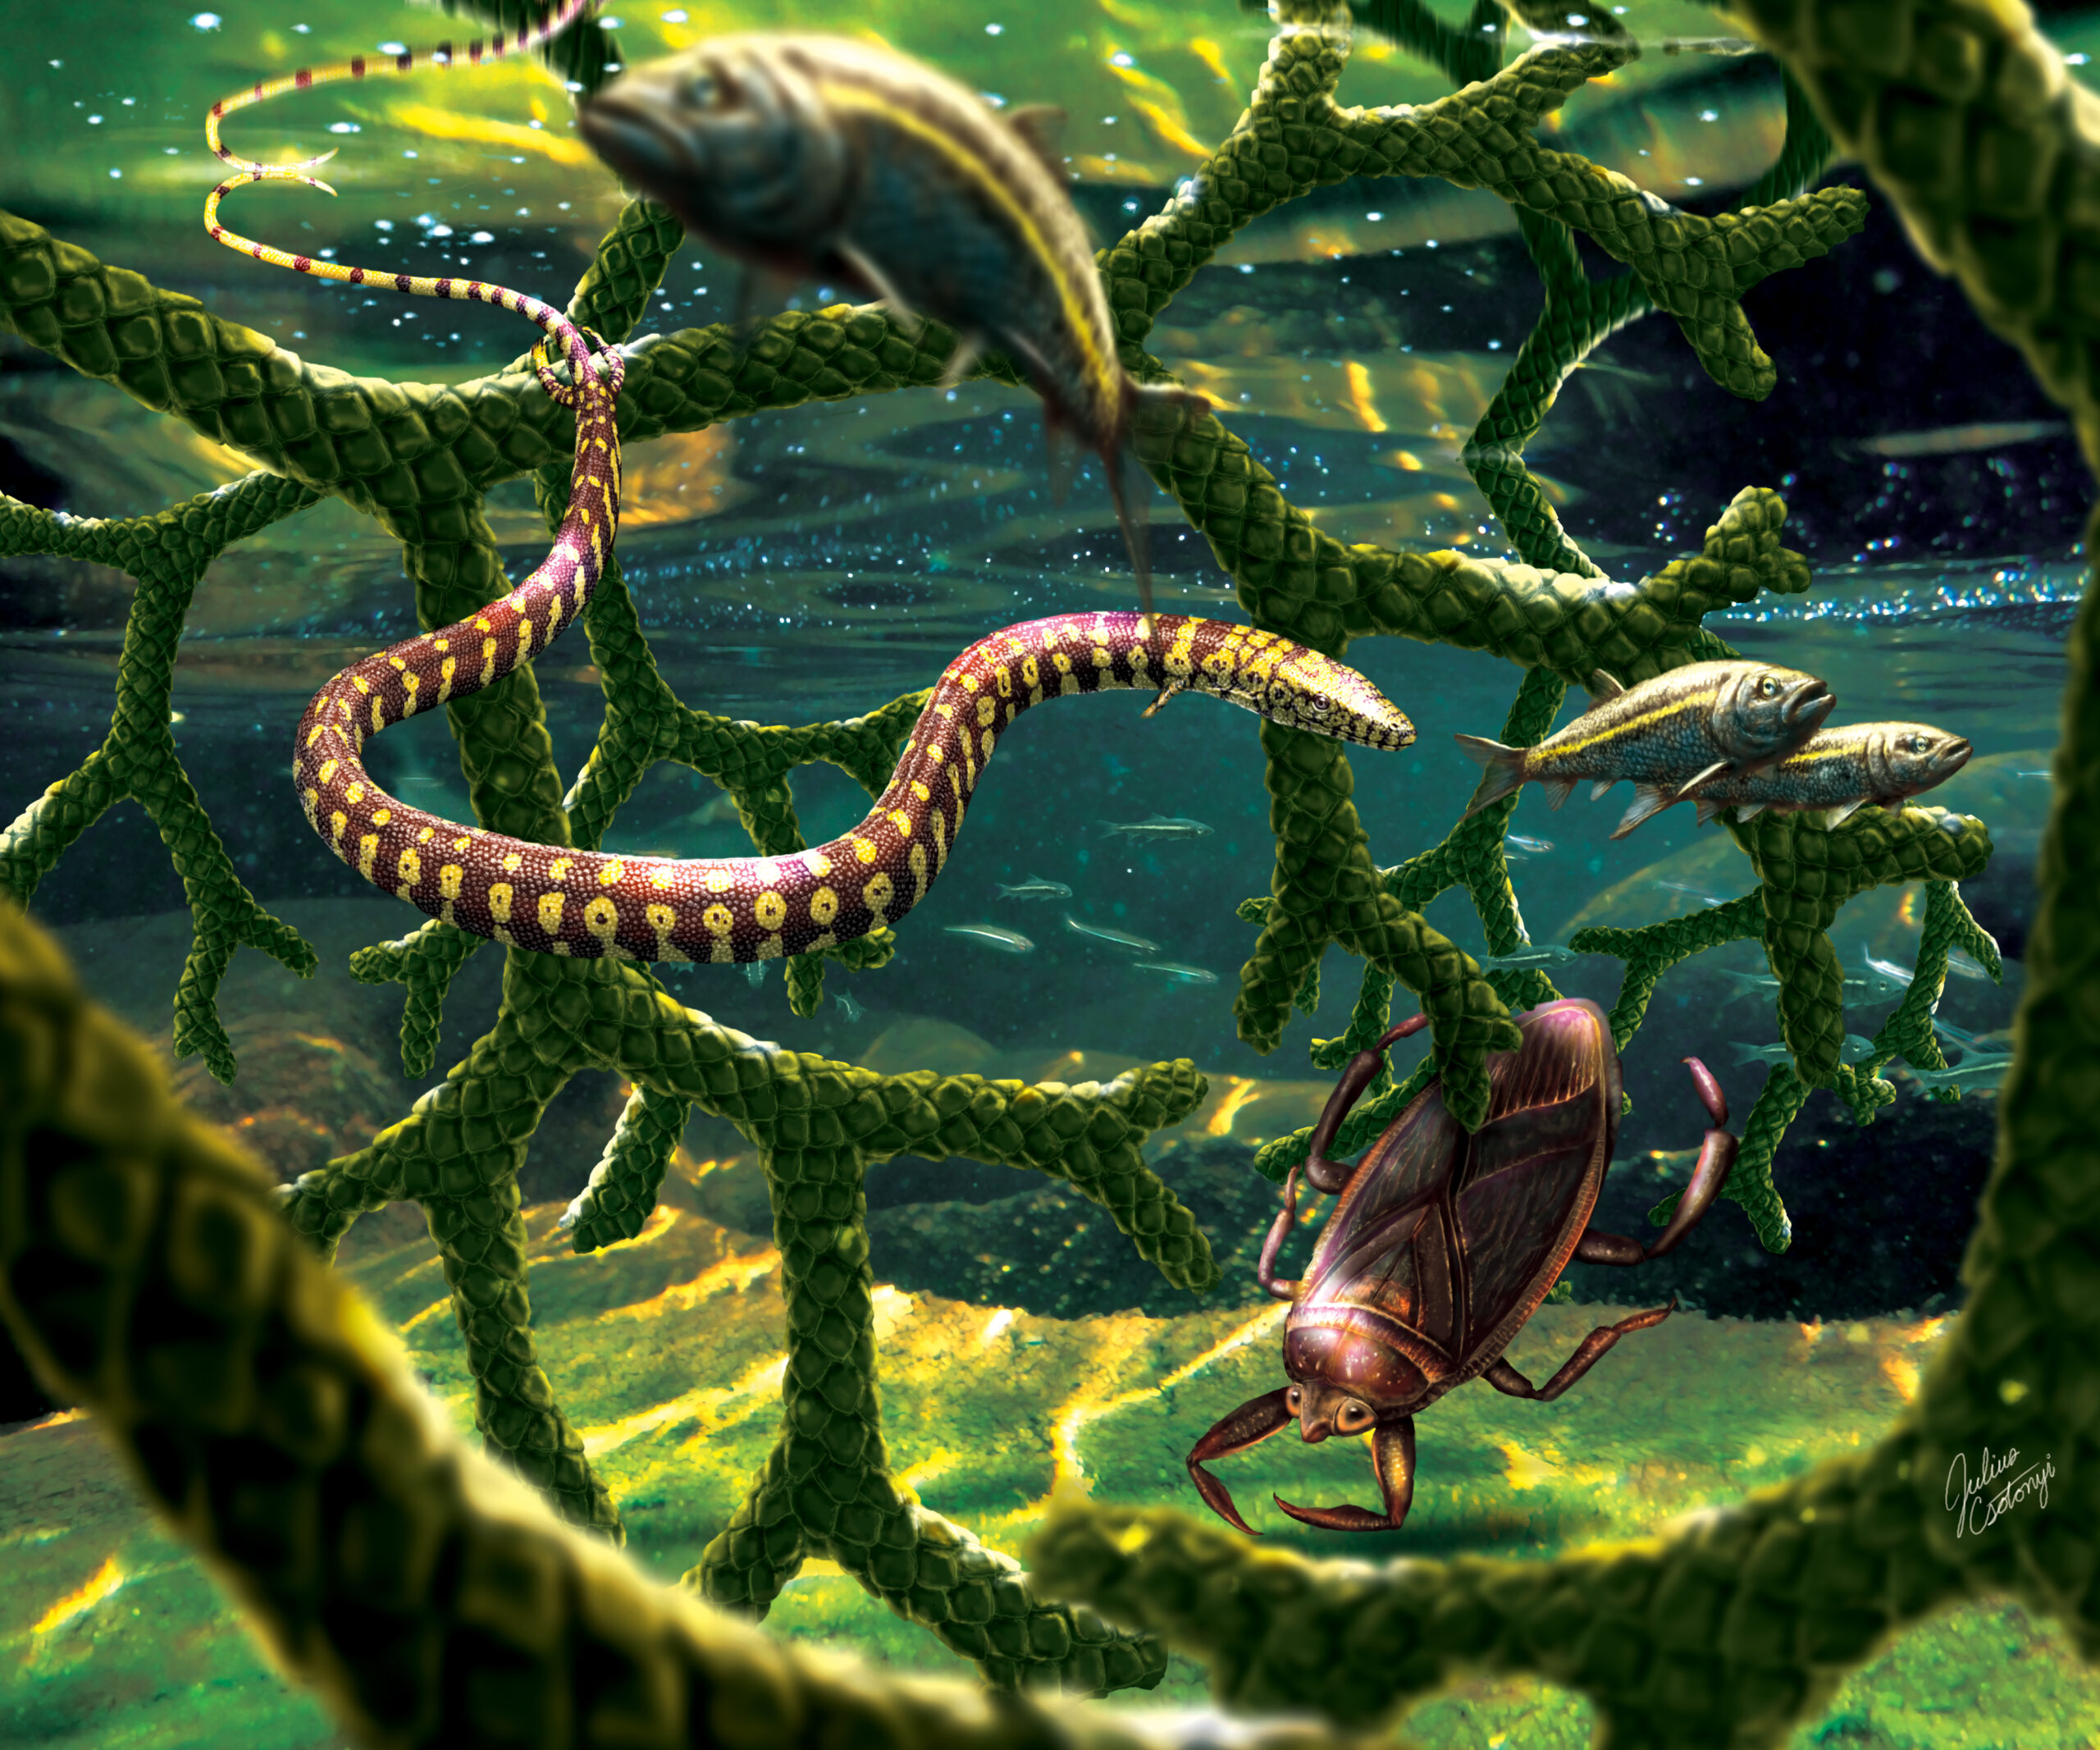 This four-legged snake fossil was probably a skinny lizard